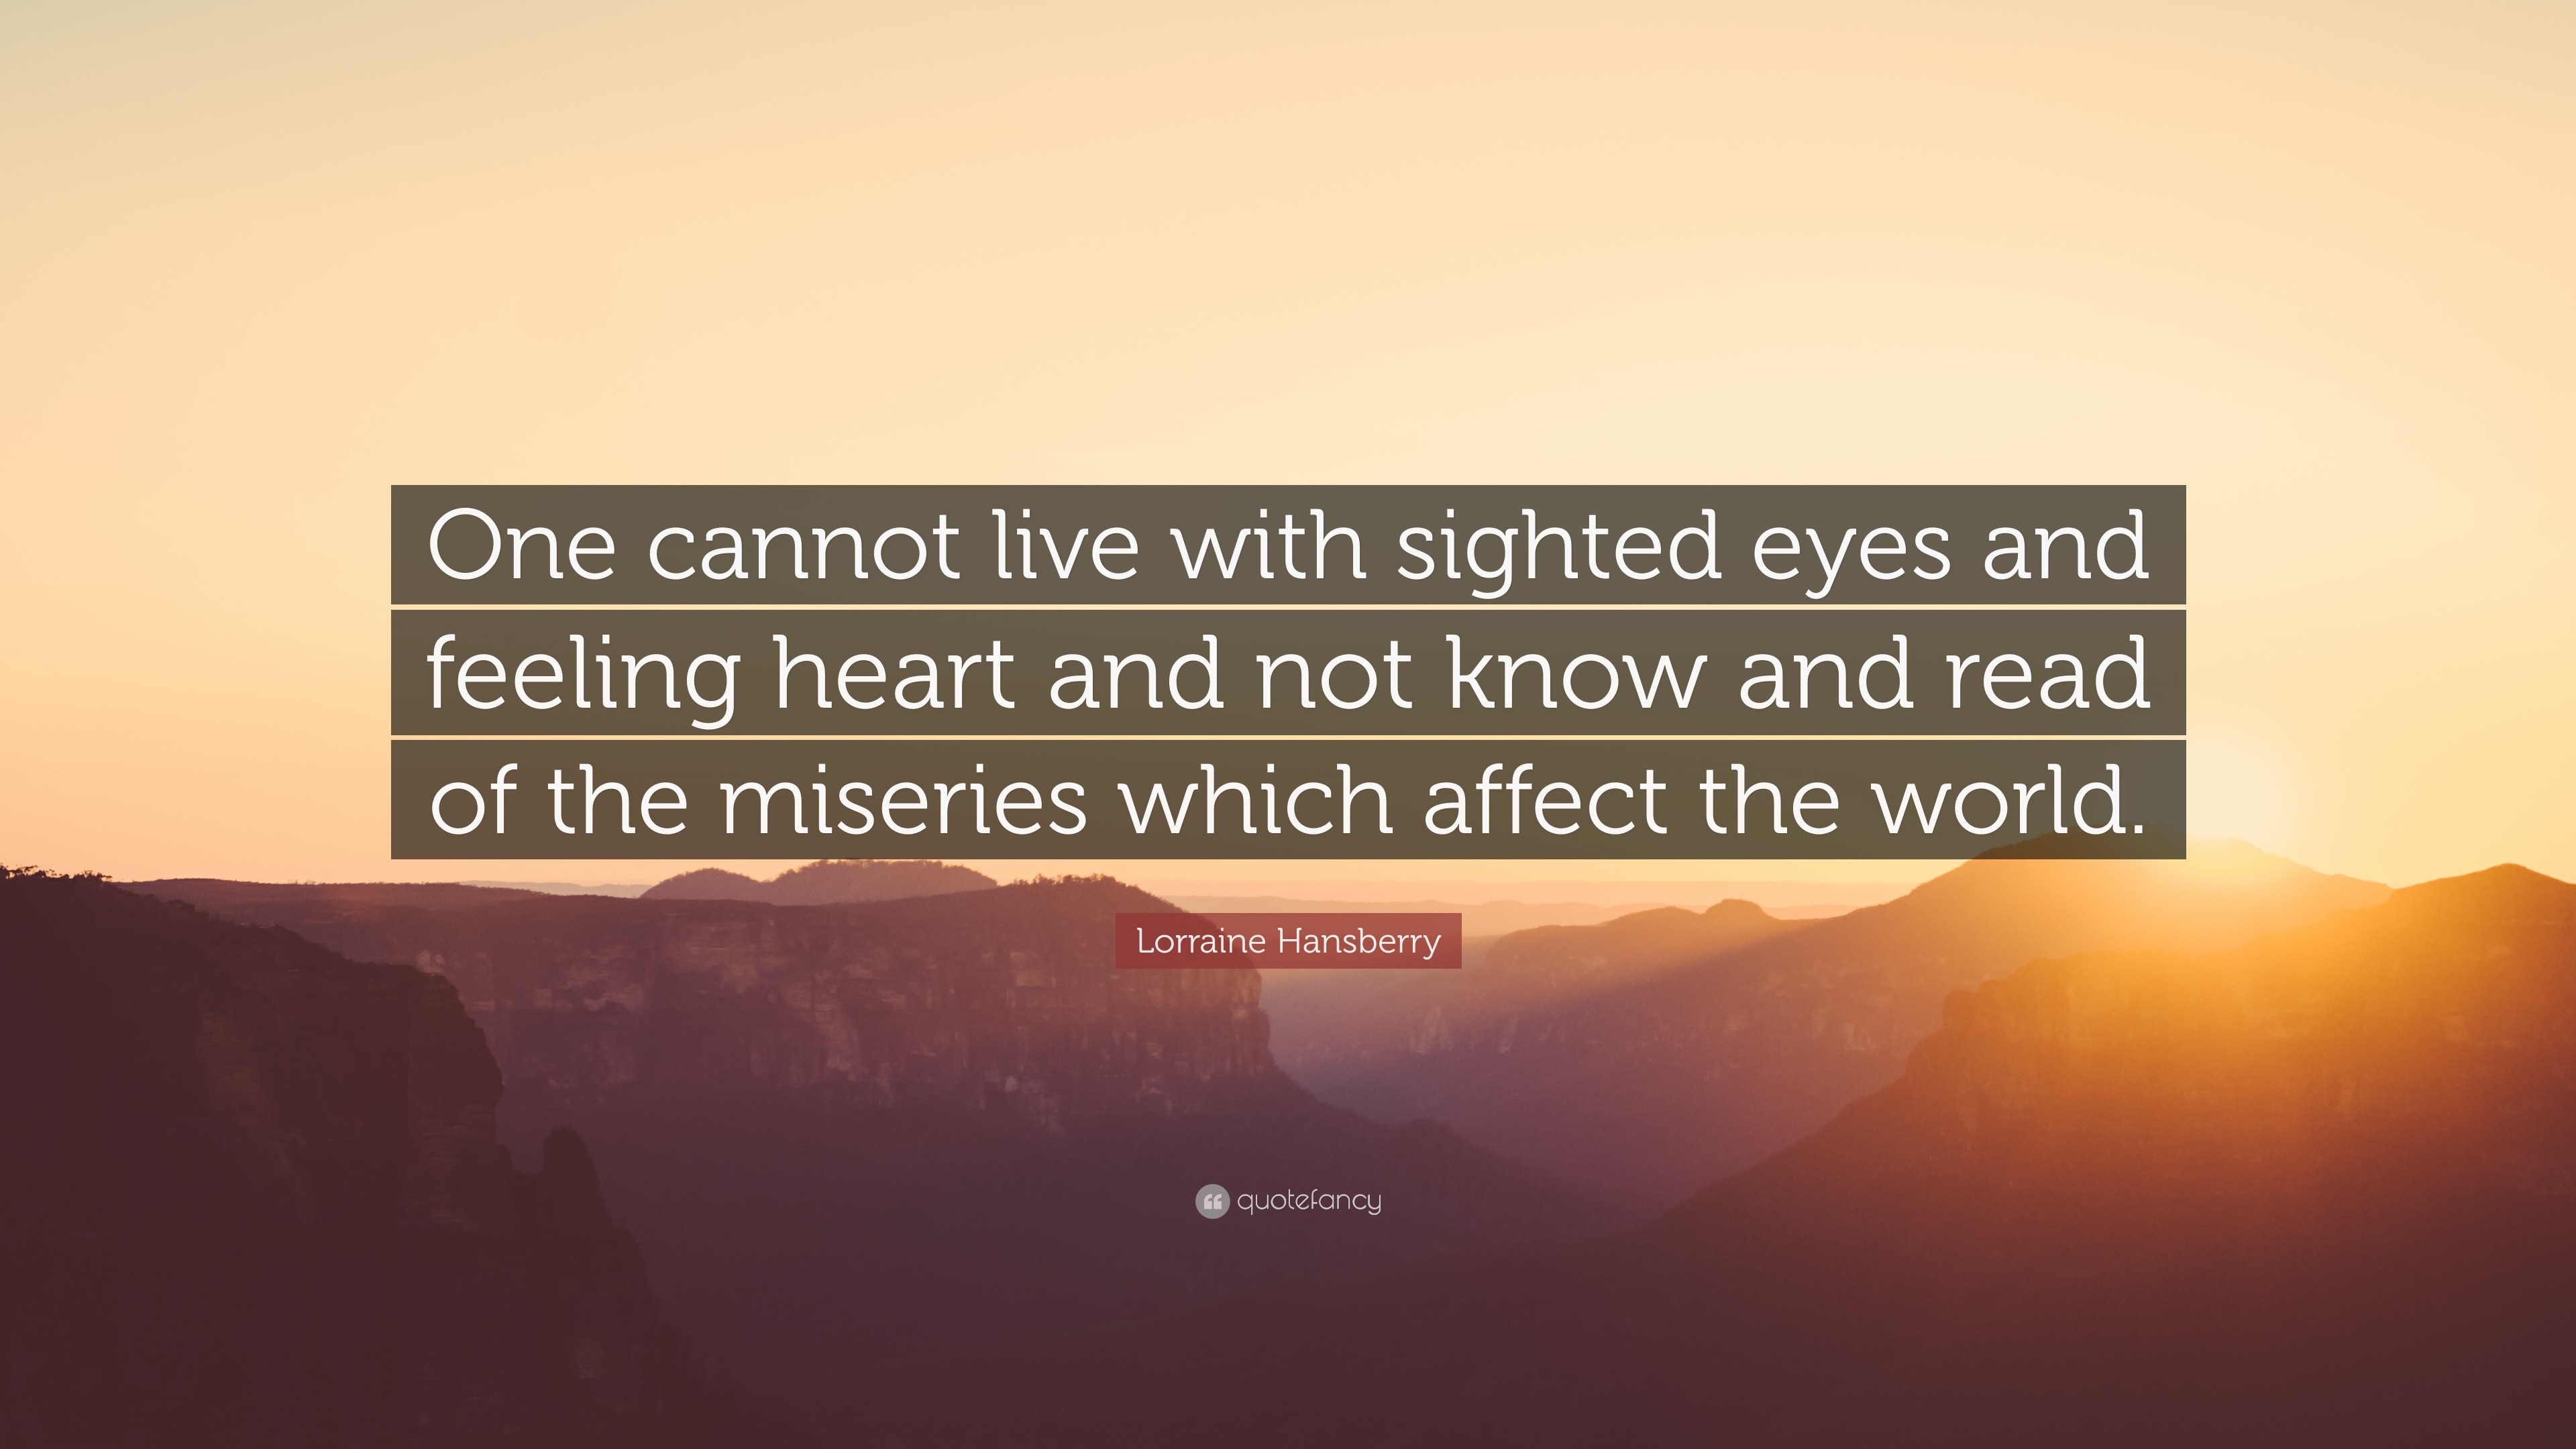 Lorraine Hansberry Quote: “One cannot live with sighted eyes and ...